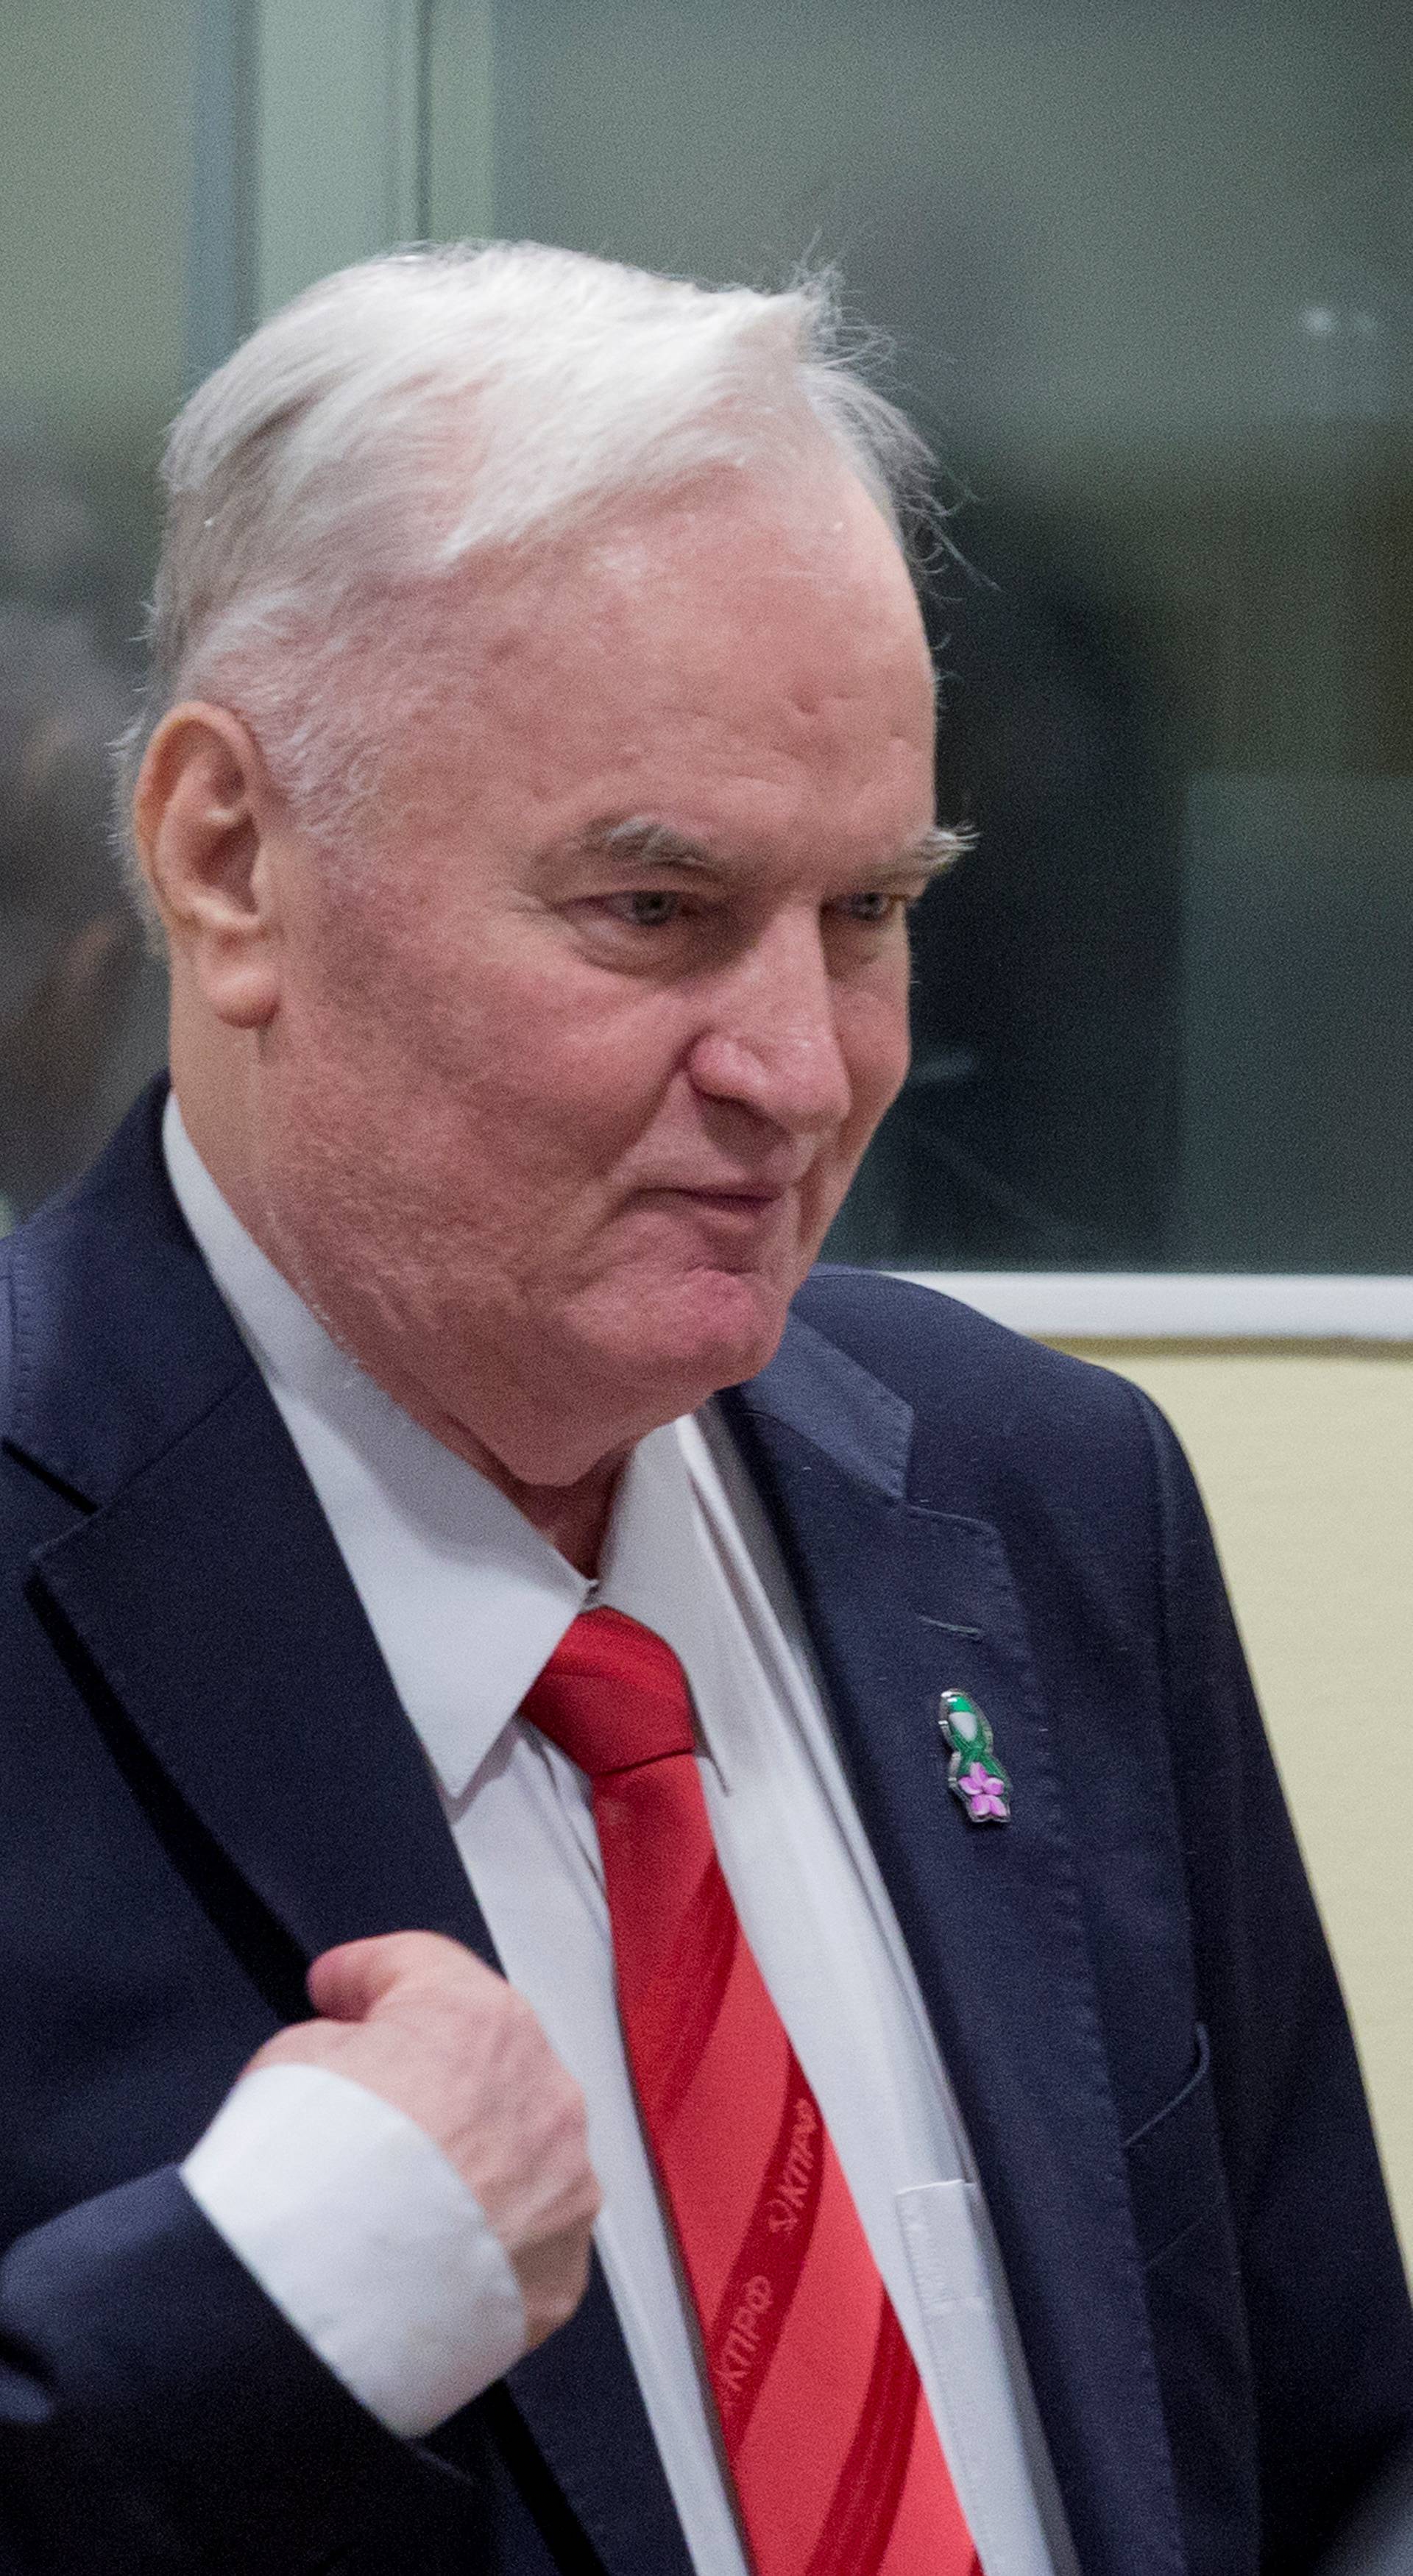 Ex-Bosnian Serb wartime general Ratko Mladic makes the sign of the cross while appearing in court at the International Criminal Tribunal for the former Yugoslavia in the Hague